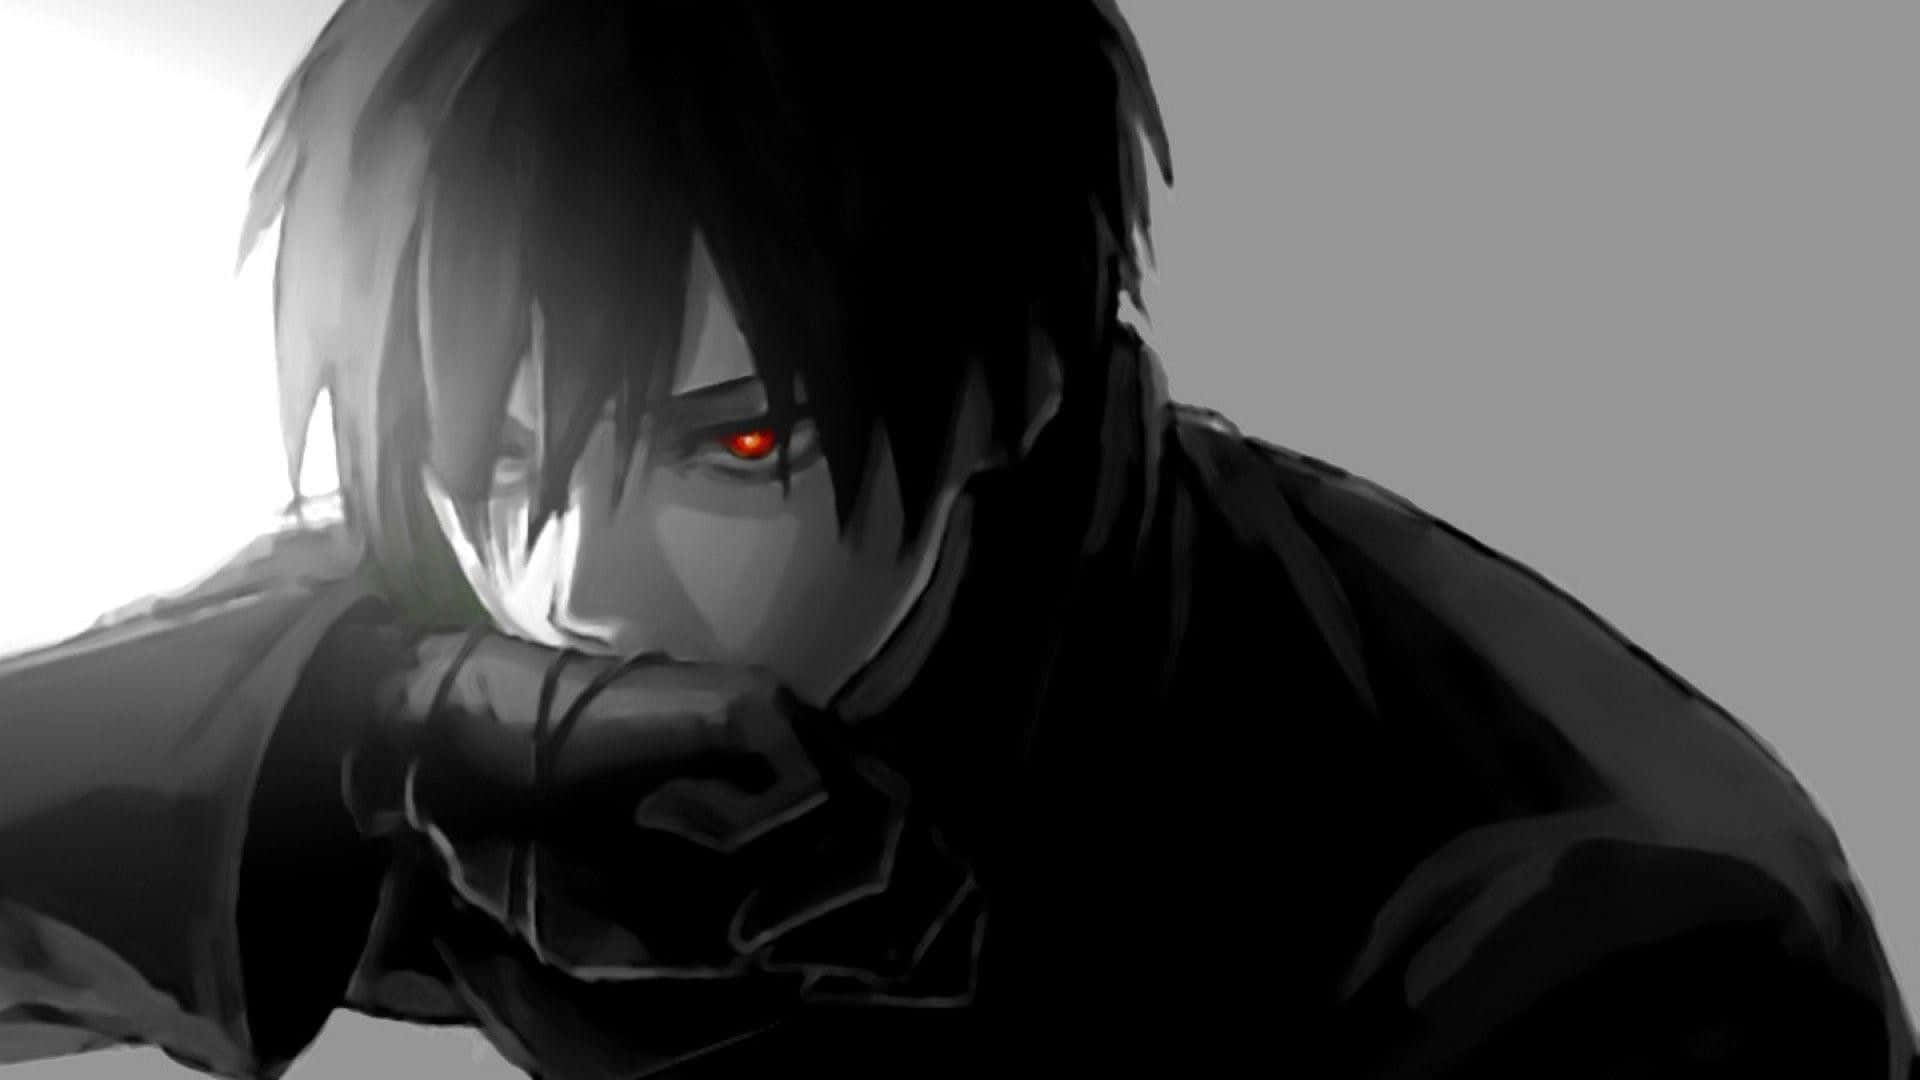 Download Black Anime Pfp With Red Eyes Wallpaper